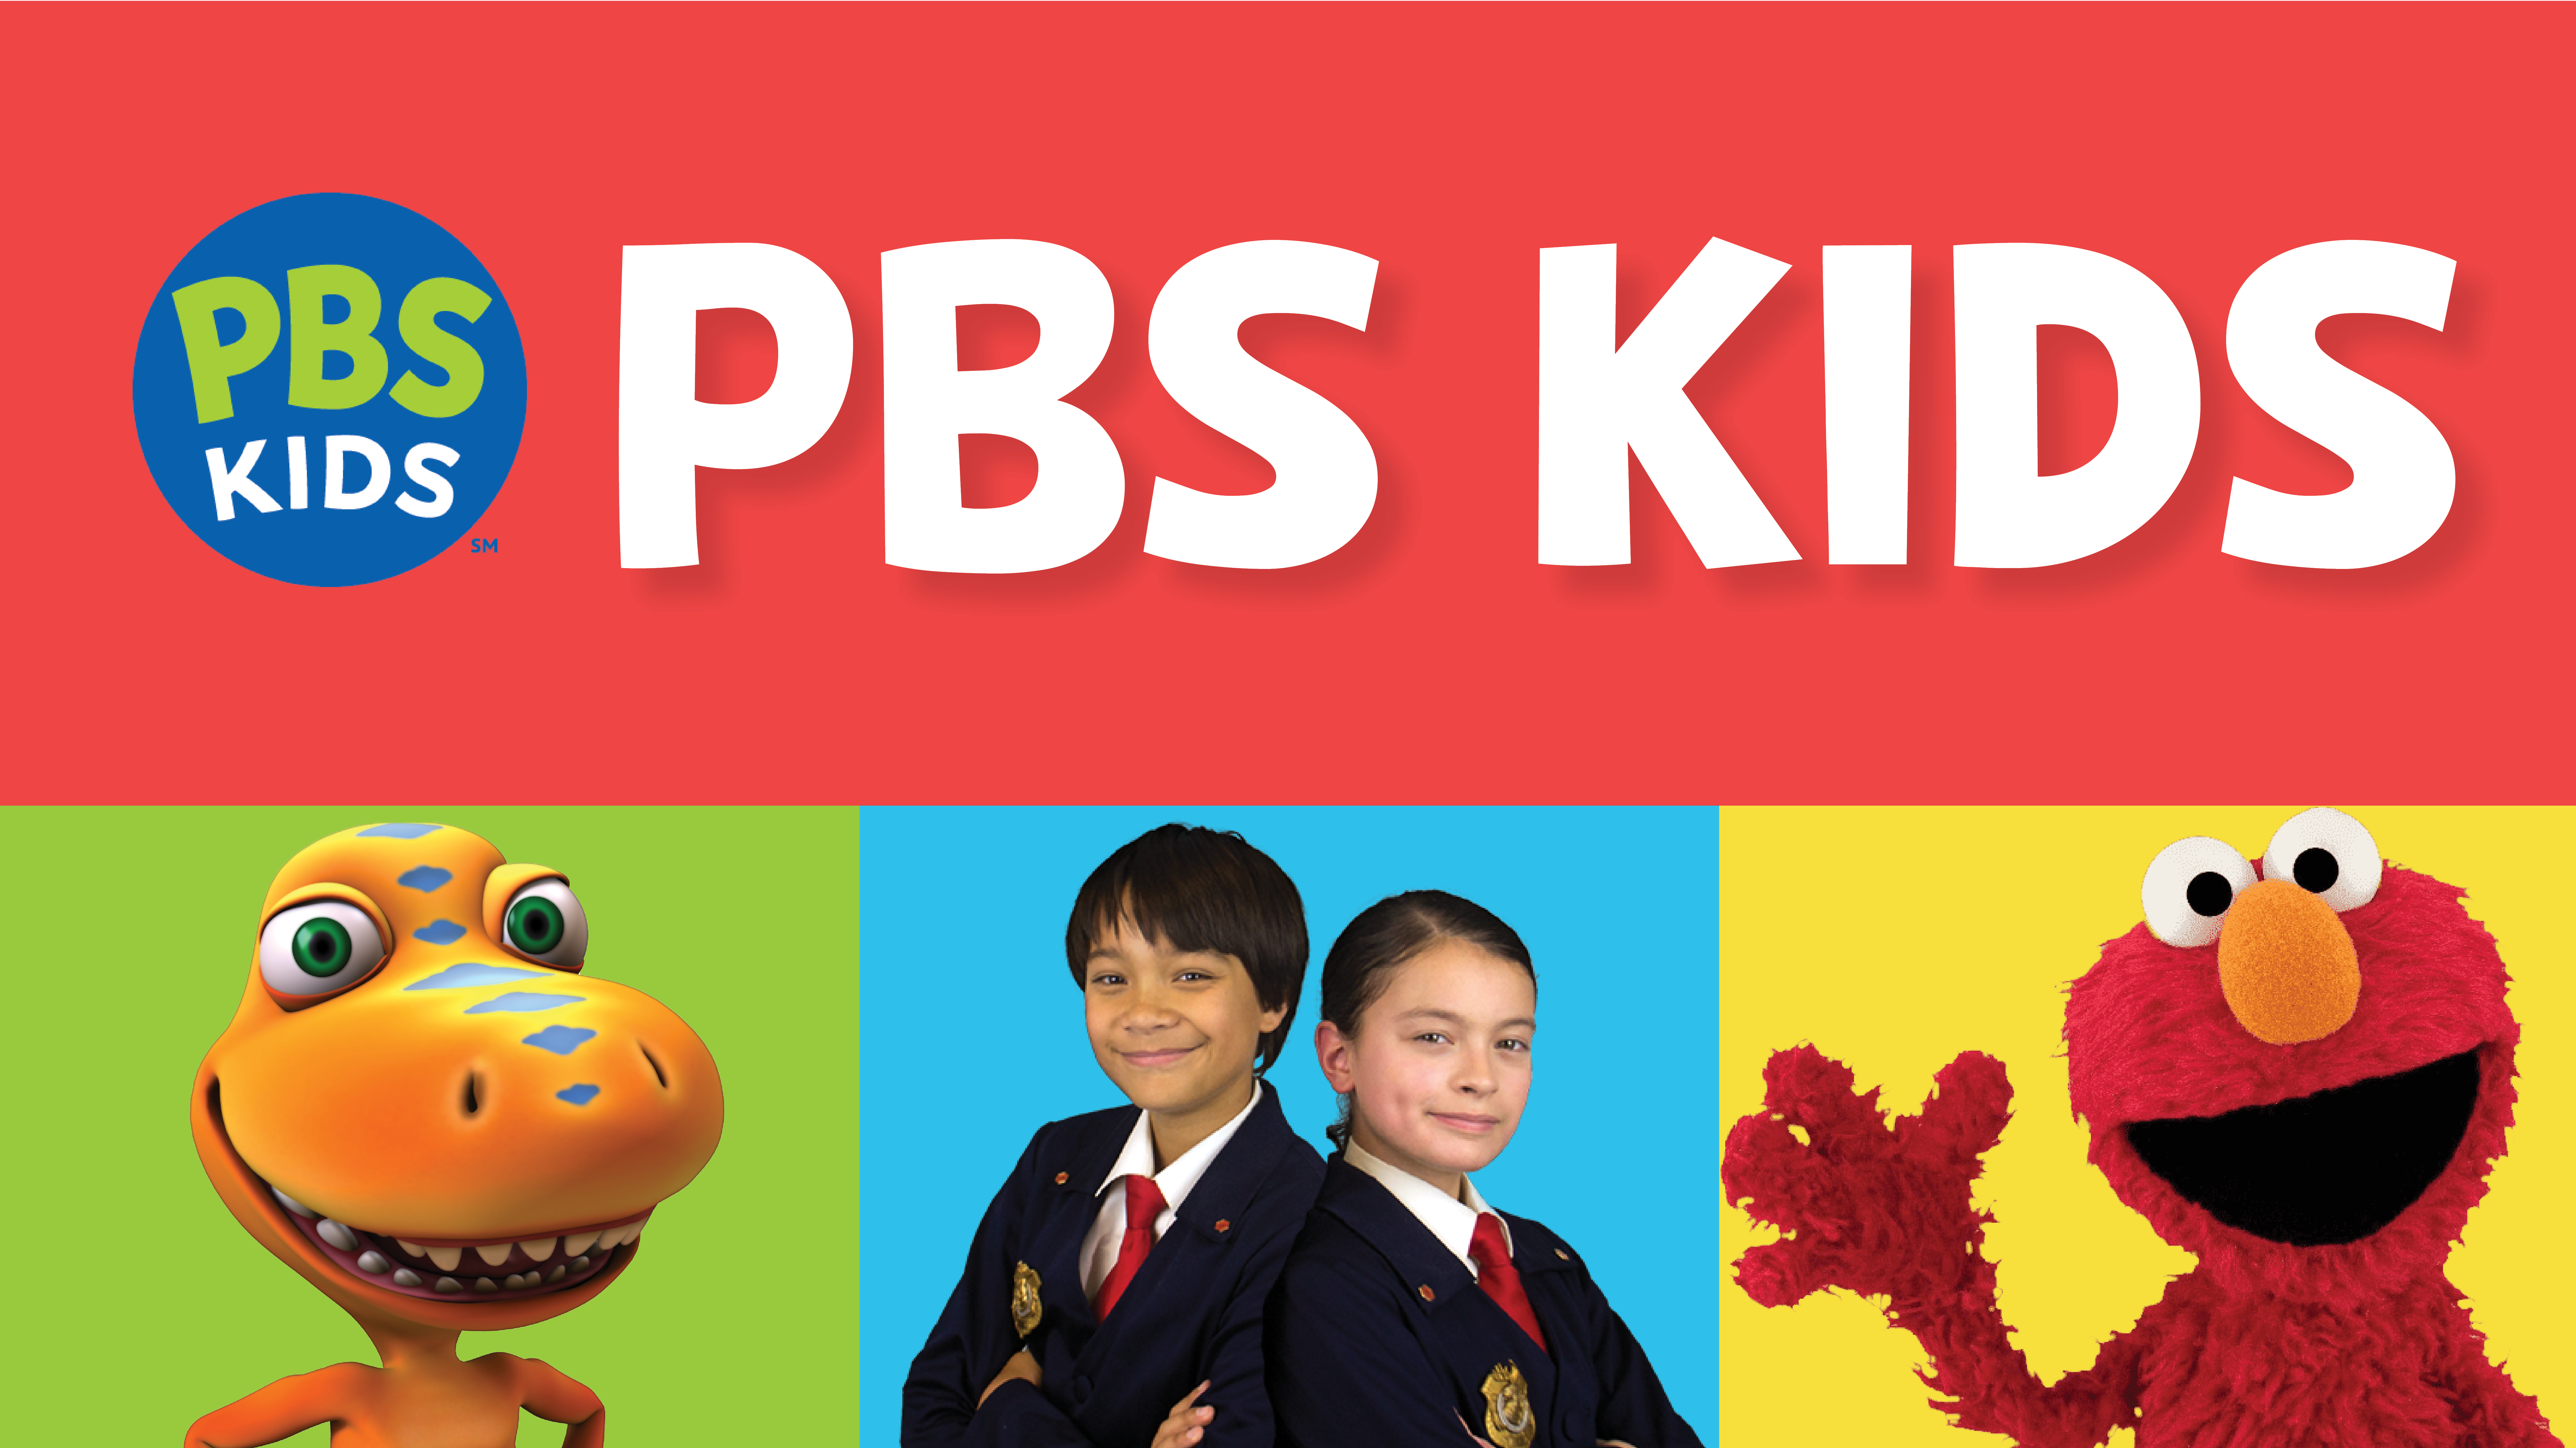 PBS Kids Website Graphic - Characters shown are Buddy the Dinosaur, Olive and Otto from Odd Squad and Elmo from Sesame Street. 